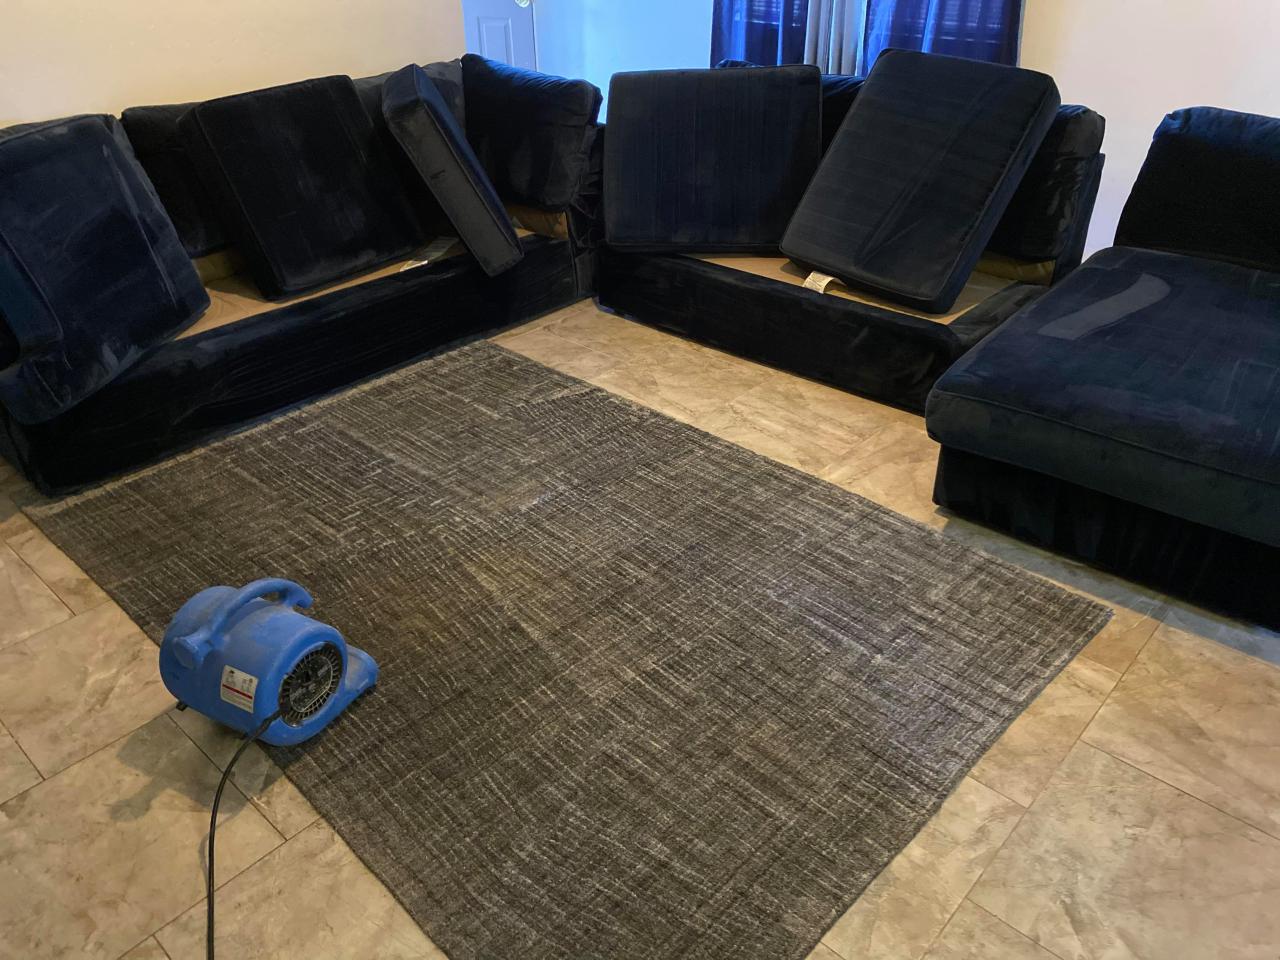 Upholstery Deep Cleaning